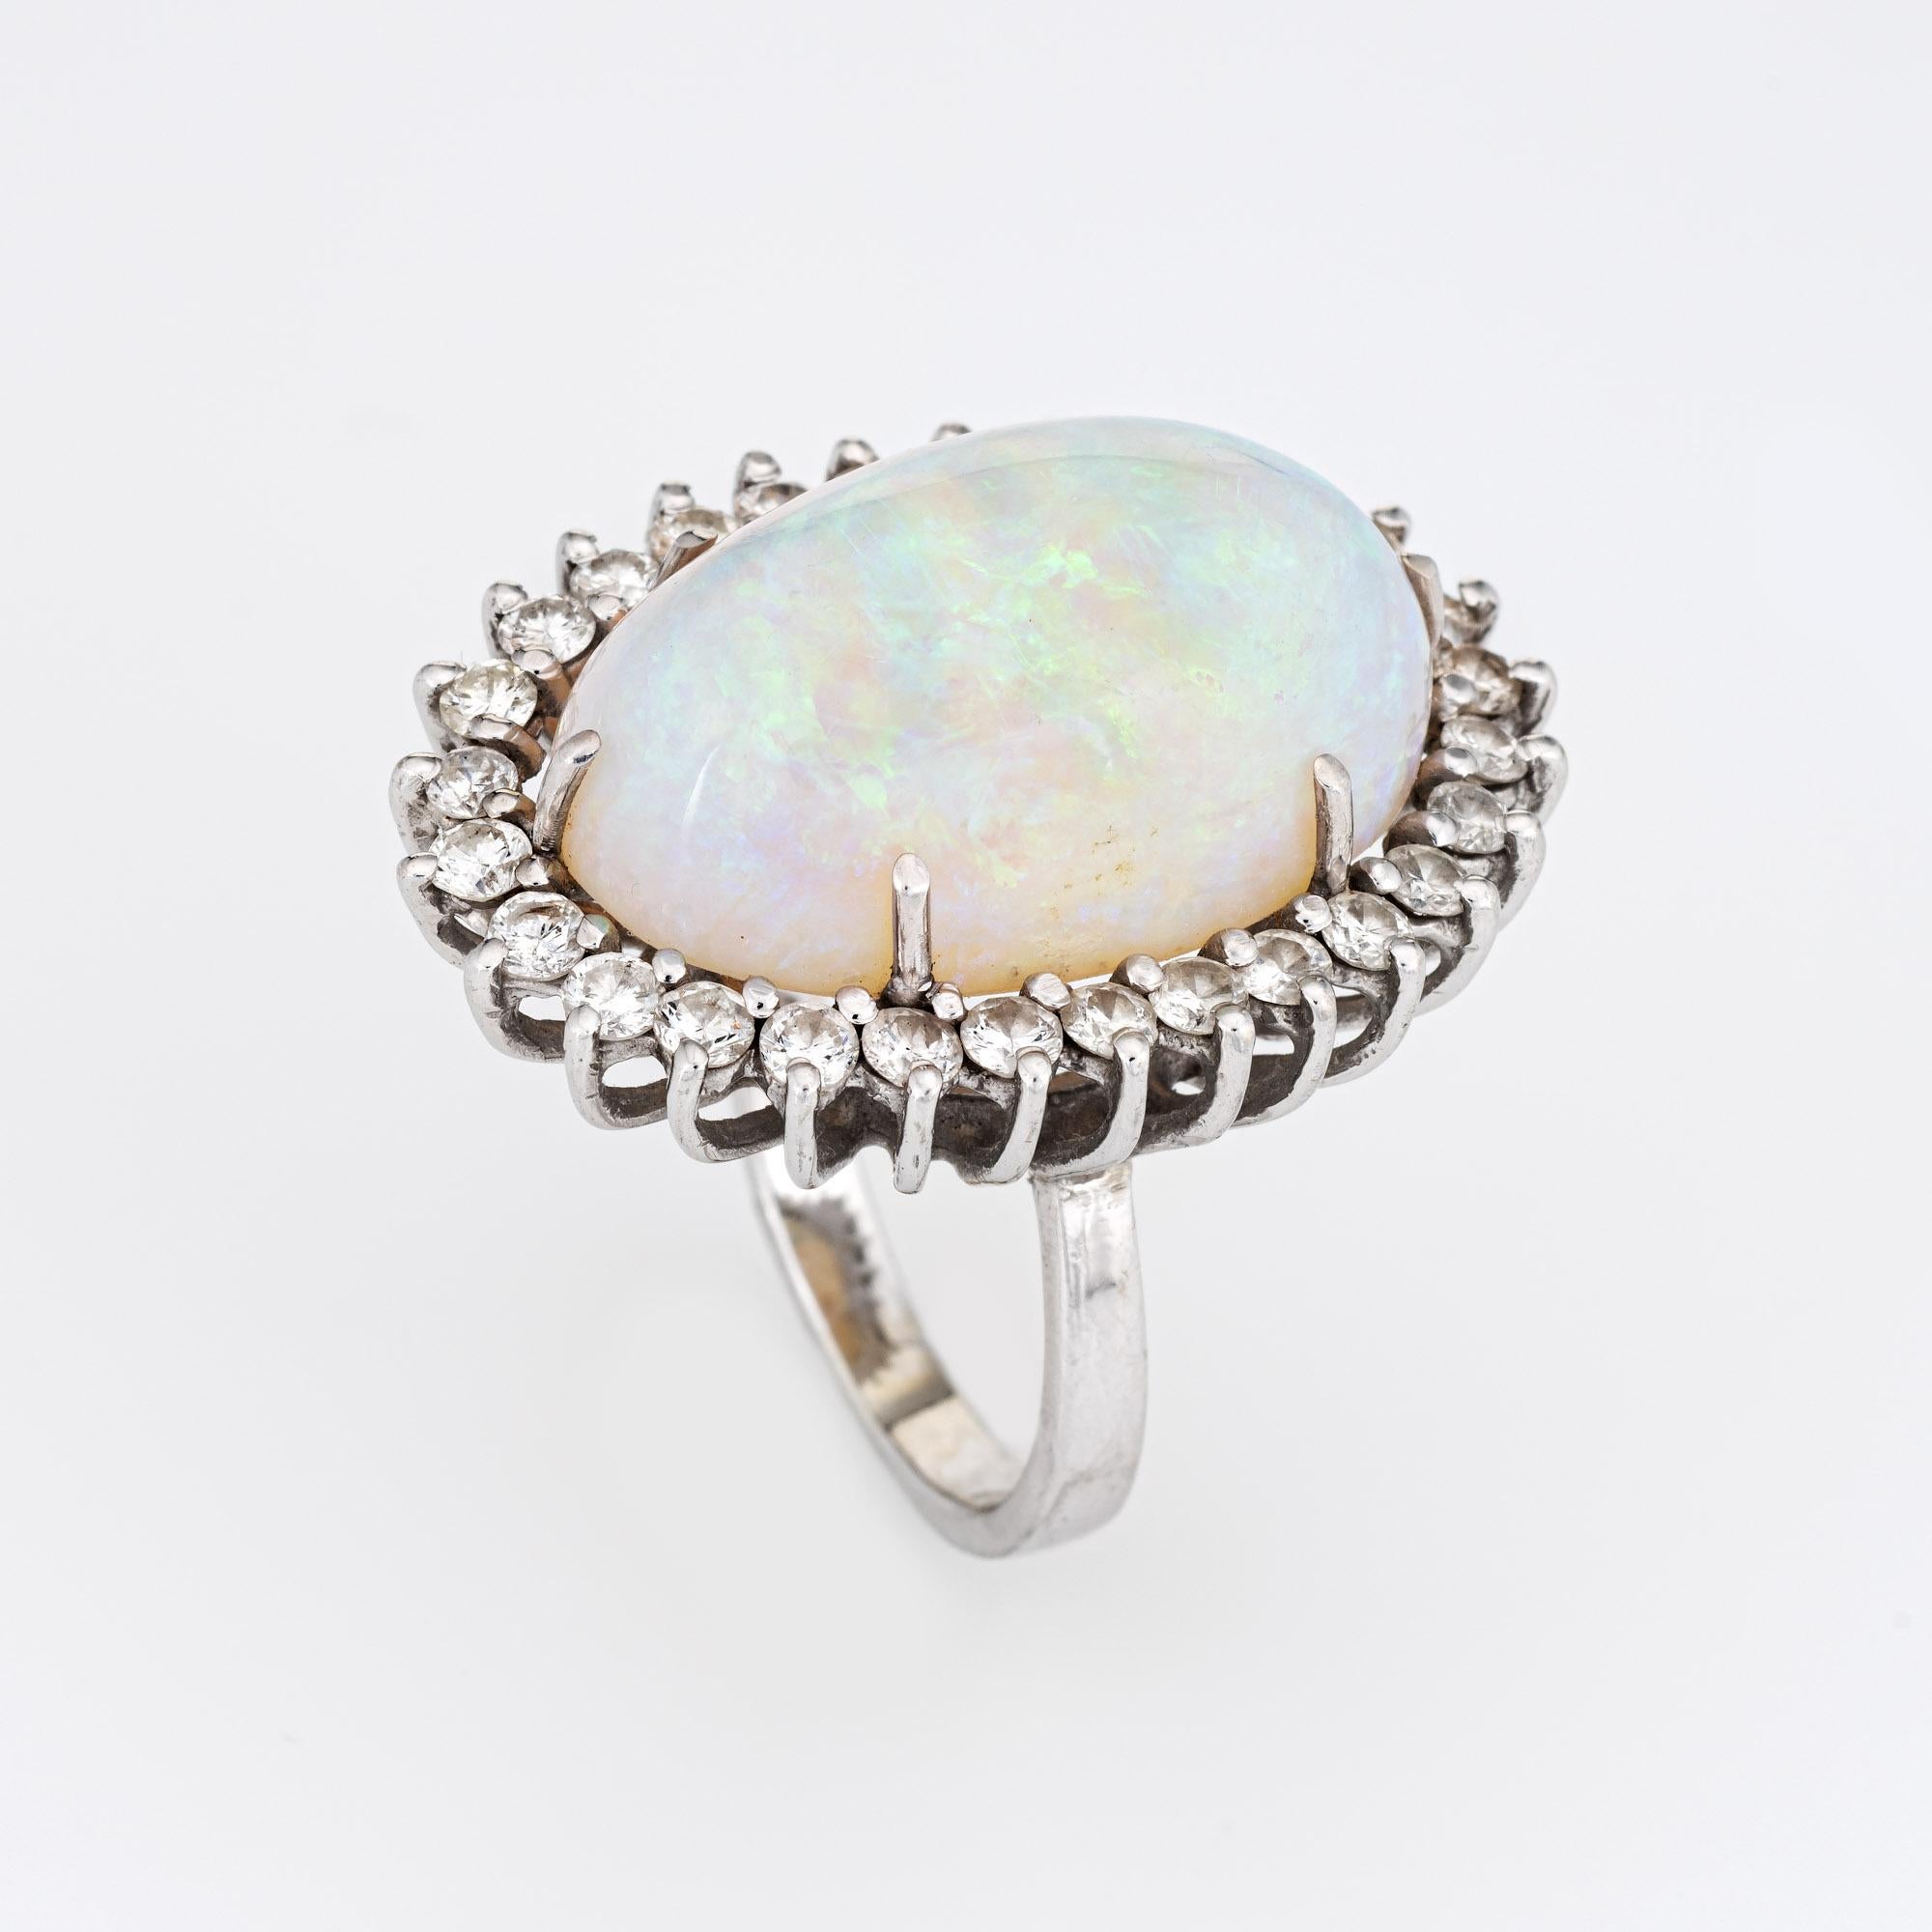 Stylish vintage natural opal ring (circa 1970s to 1980s) crafted in 14 karat white gold. 

Natural opal measures 22mm x 14.5mm (estimated at 22 carats). The opal is in very good condition and free of cracks or chips. Round brilliant cut diamonds